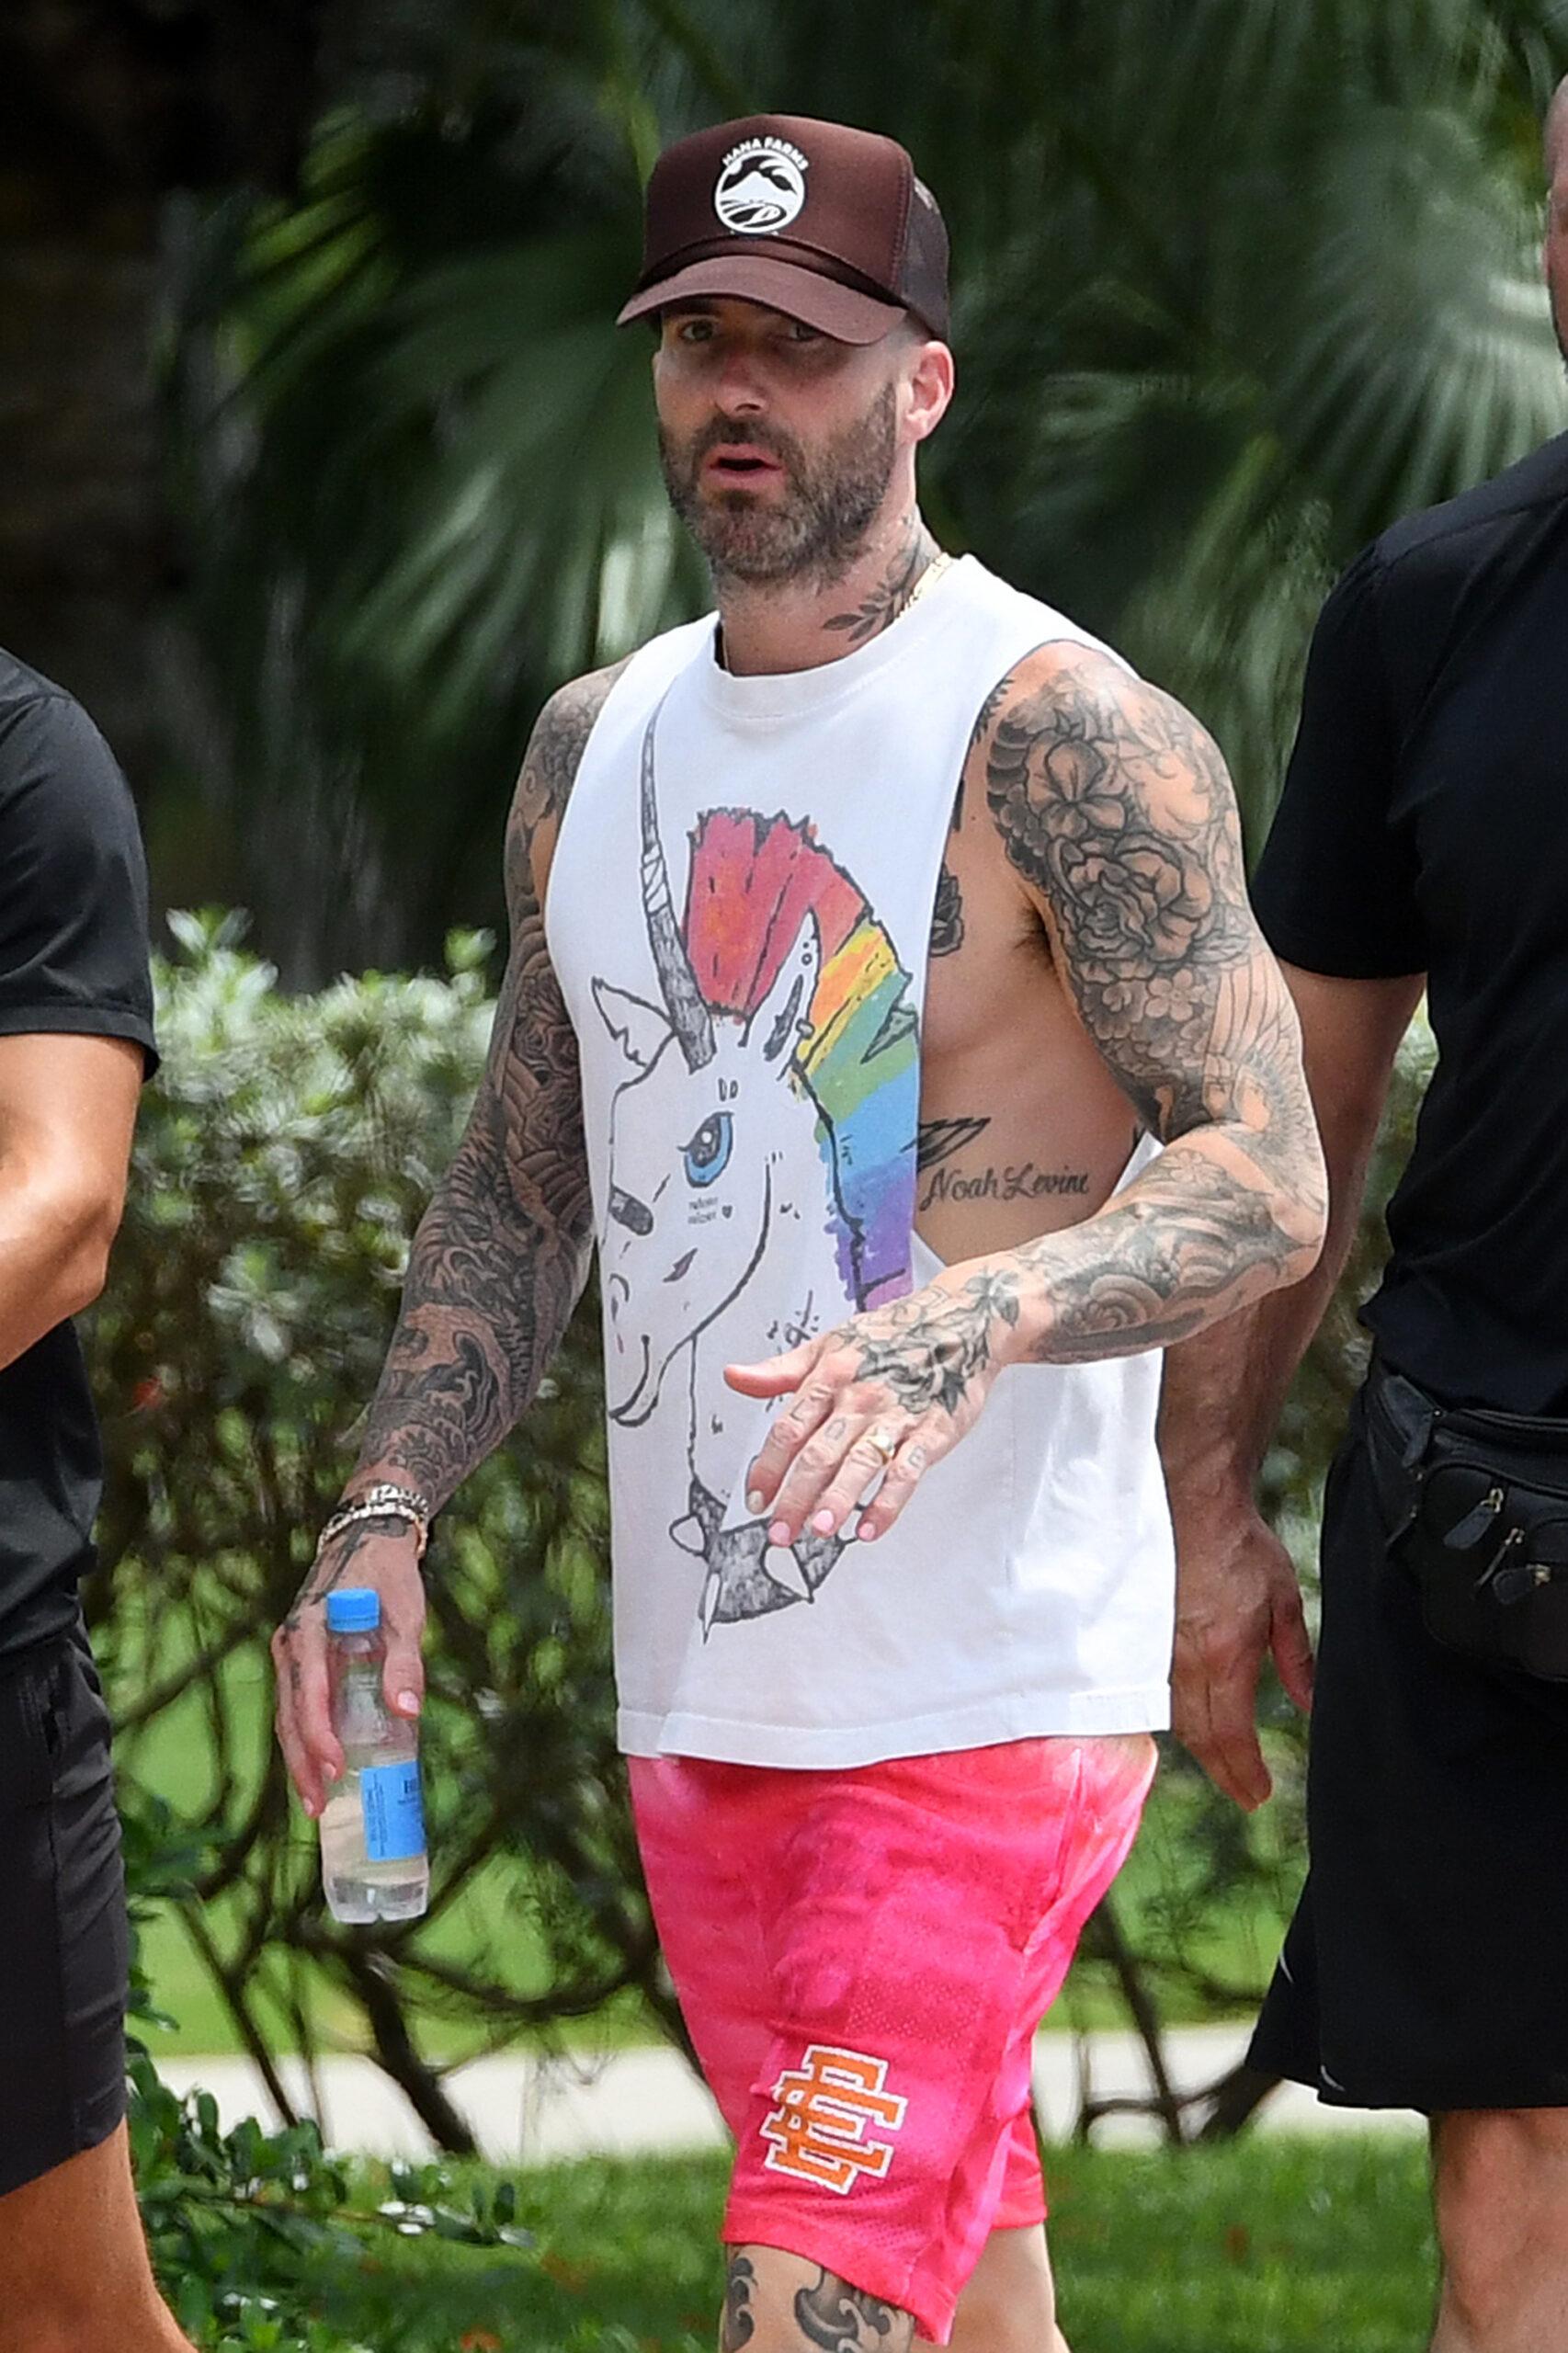 Adam Levine wears a unicorn shirt as he walks with his trainer and bodyguard in Miami